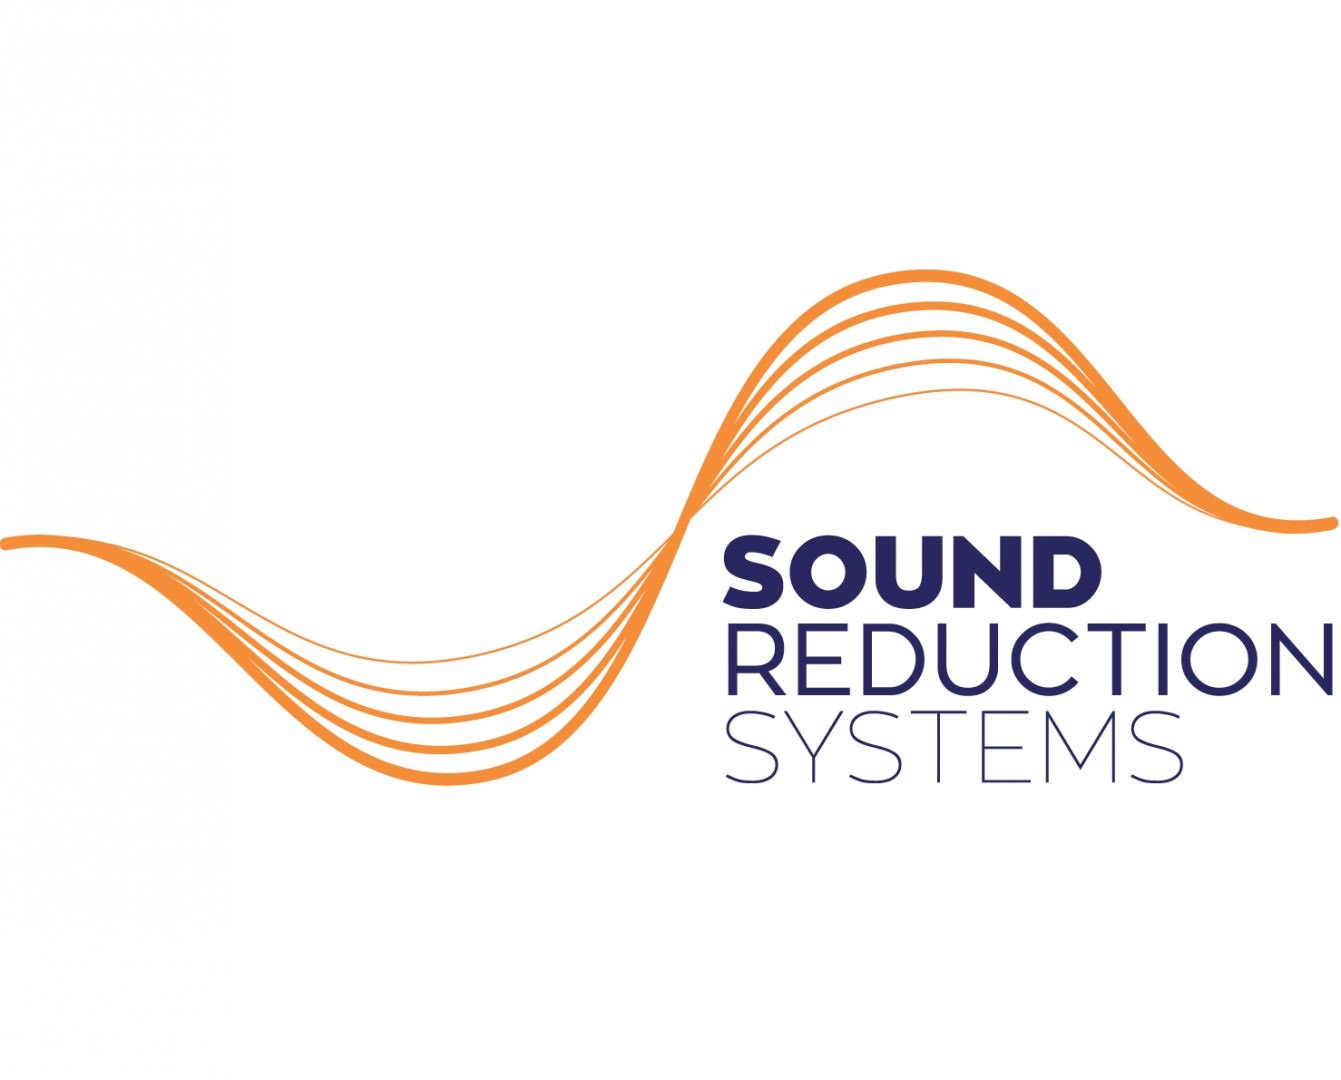 Soundproofing products from Sound Reduction Systems (SRS)